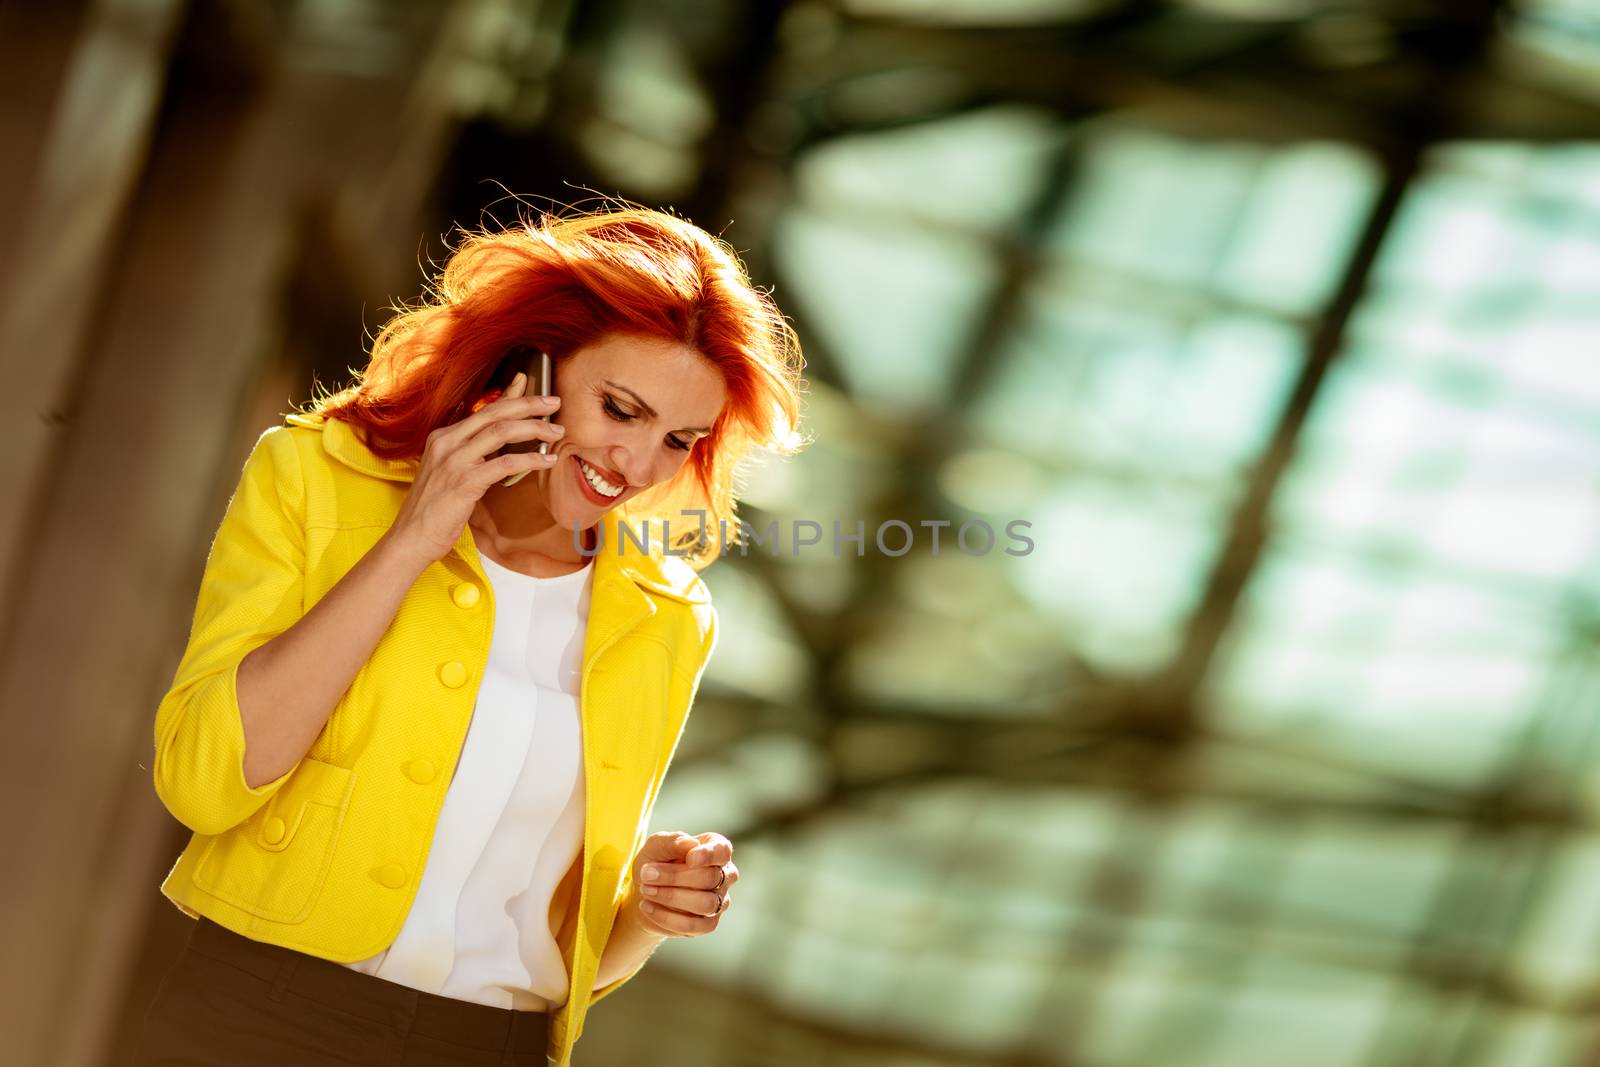 Smiling successful businesswoman talking on smartphone in office district.